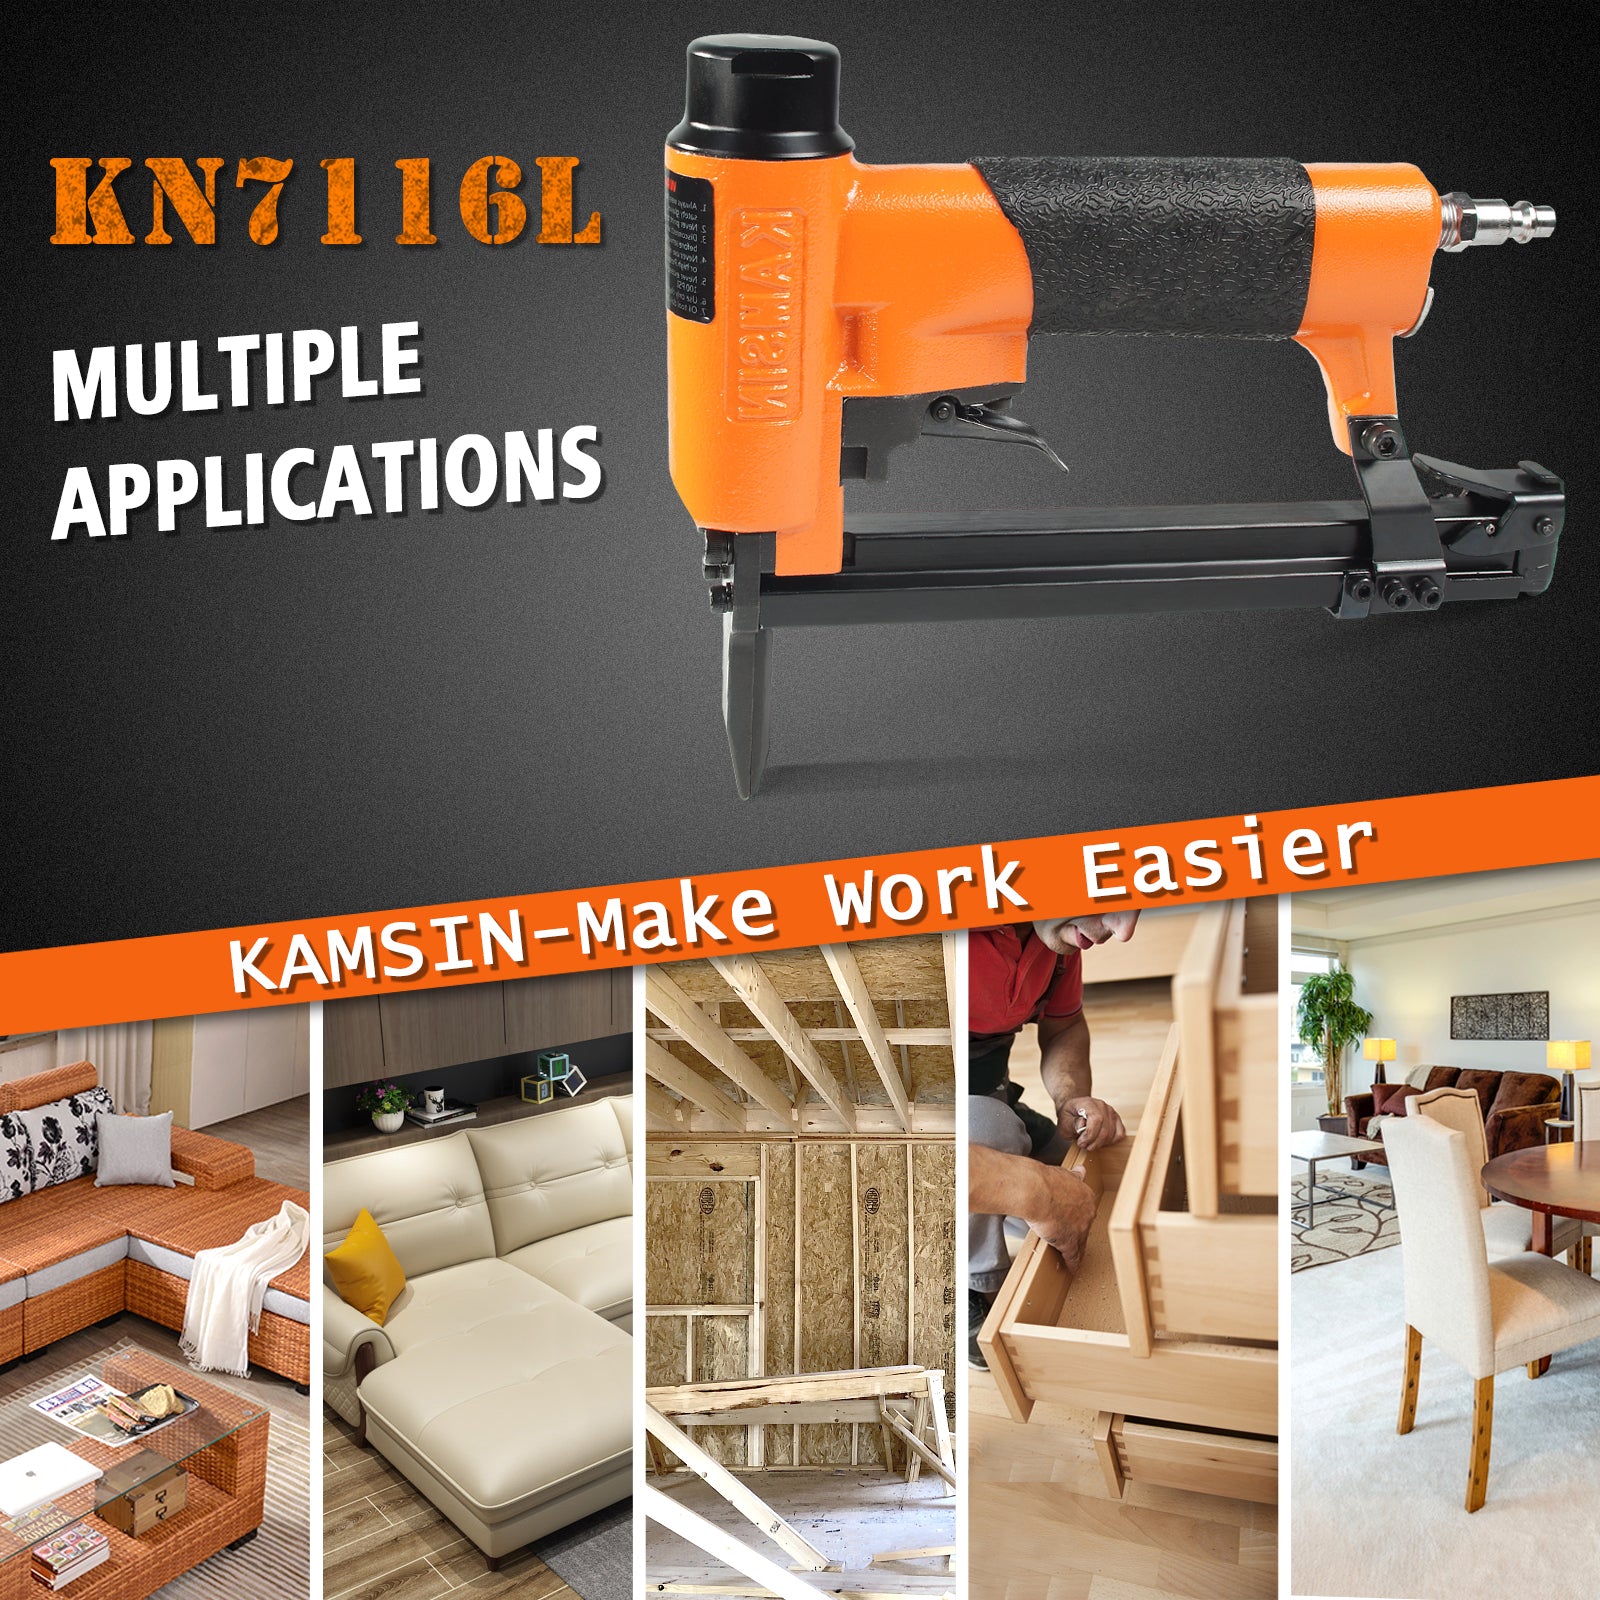 KAMSIN KN7116L 22 Gauge Pneumatic Upholstery Stapler with Long Nose 71 Series 3/8